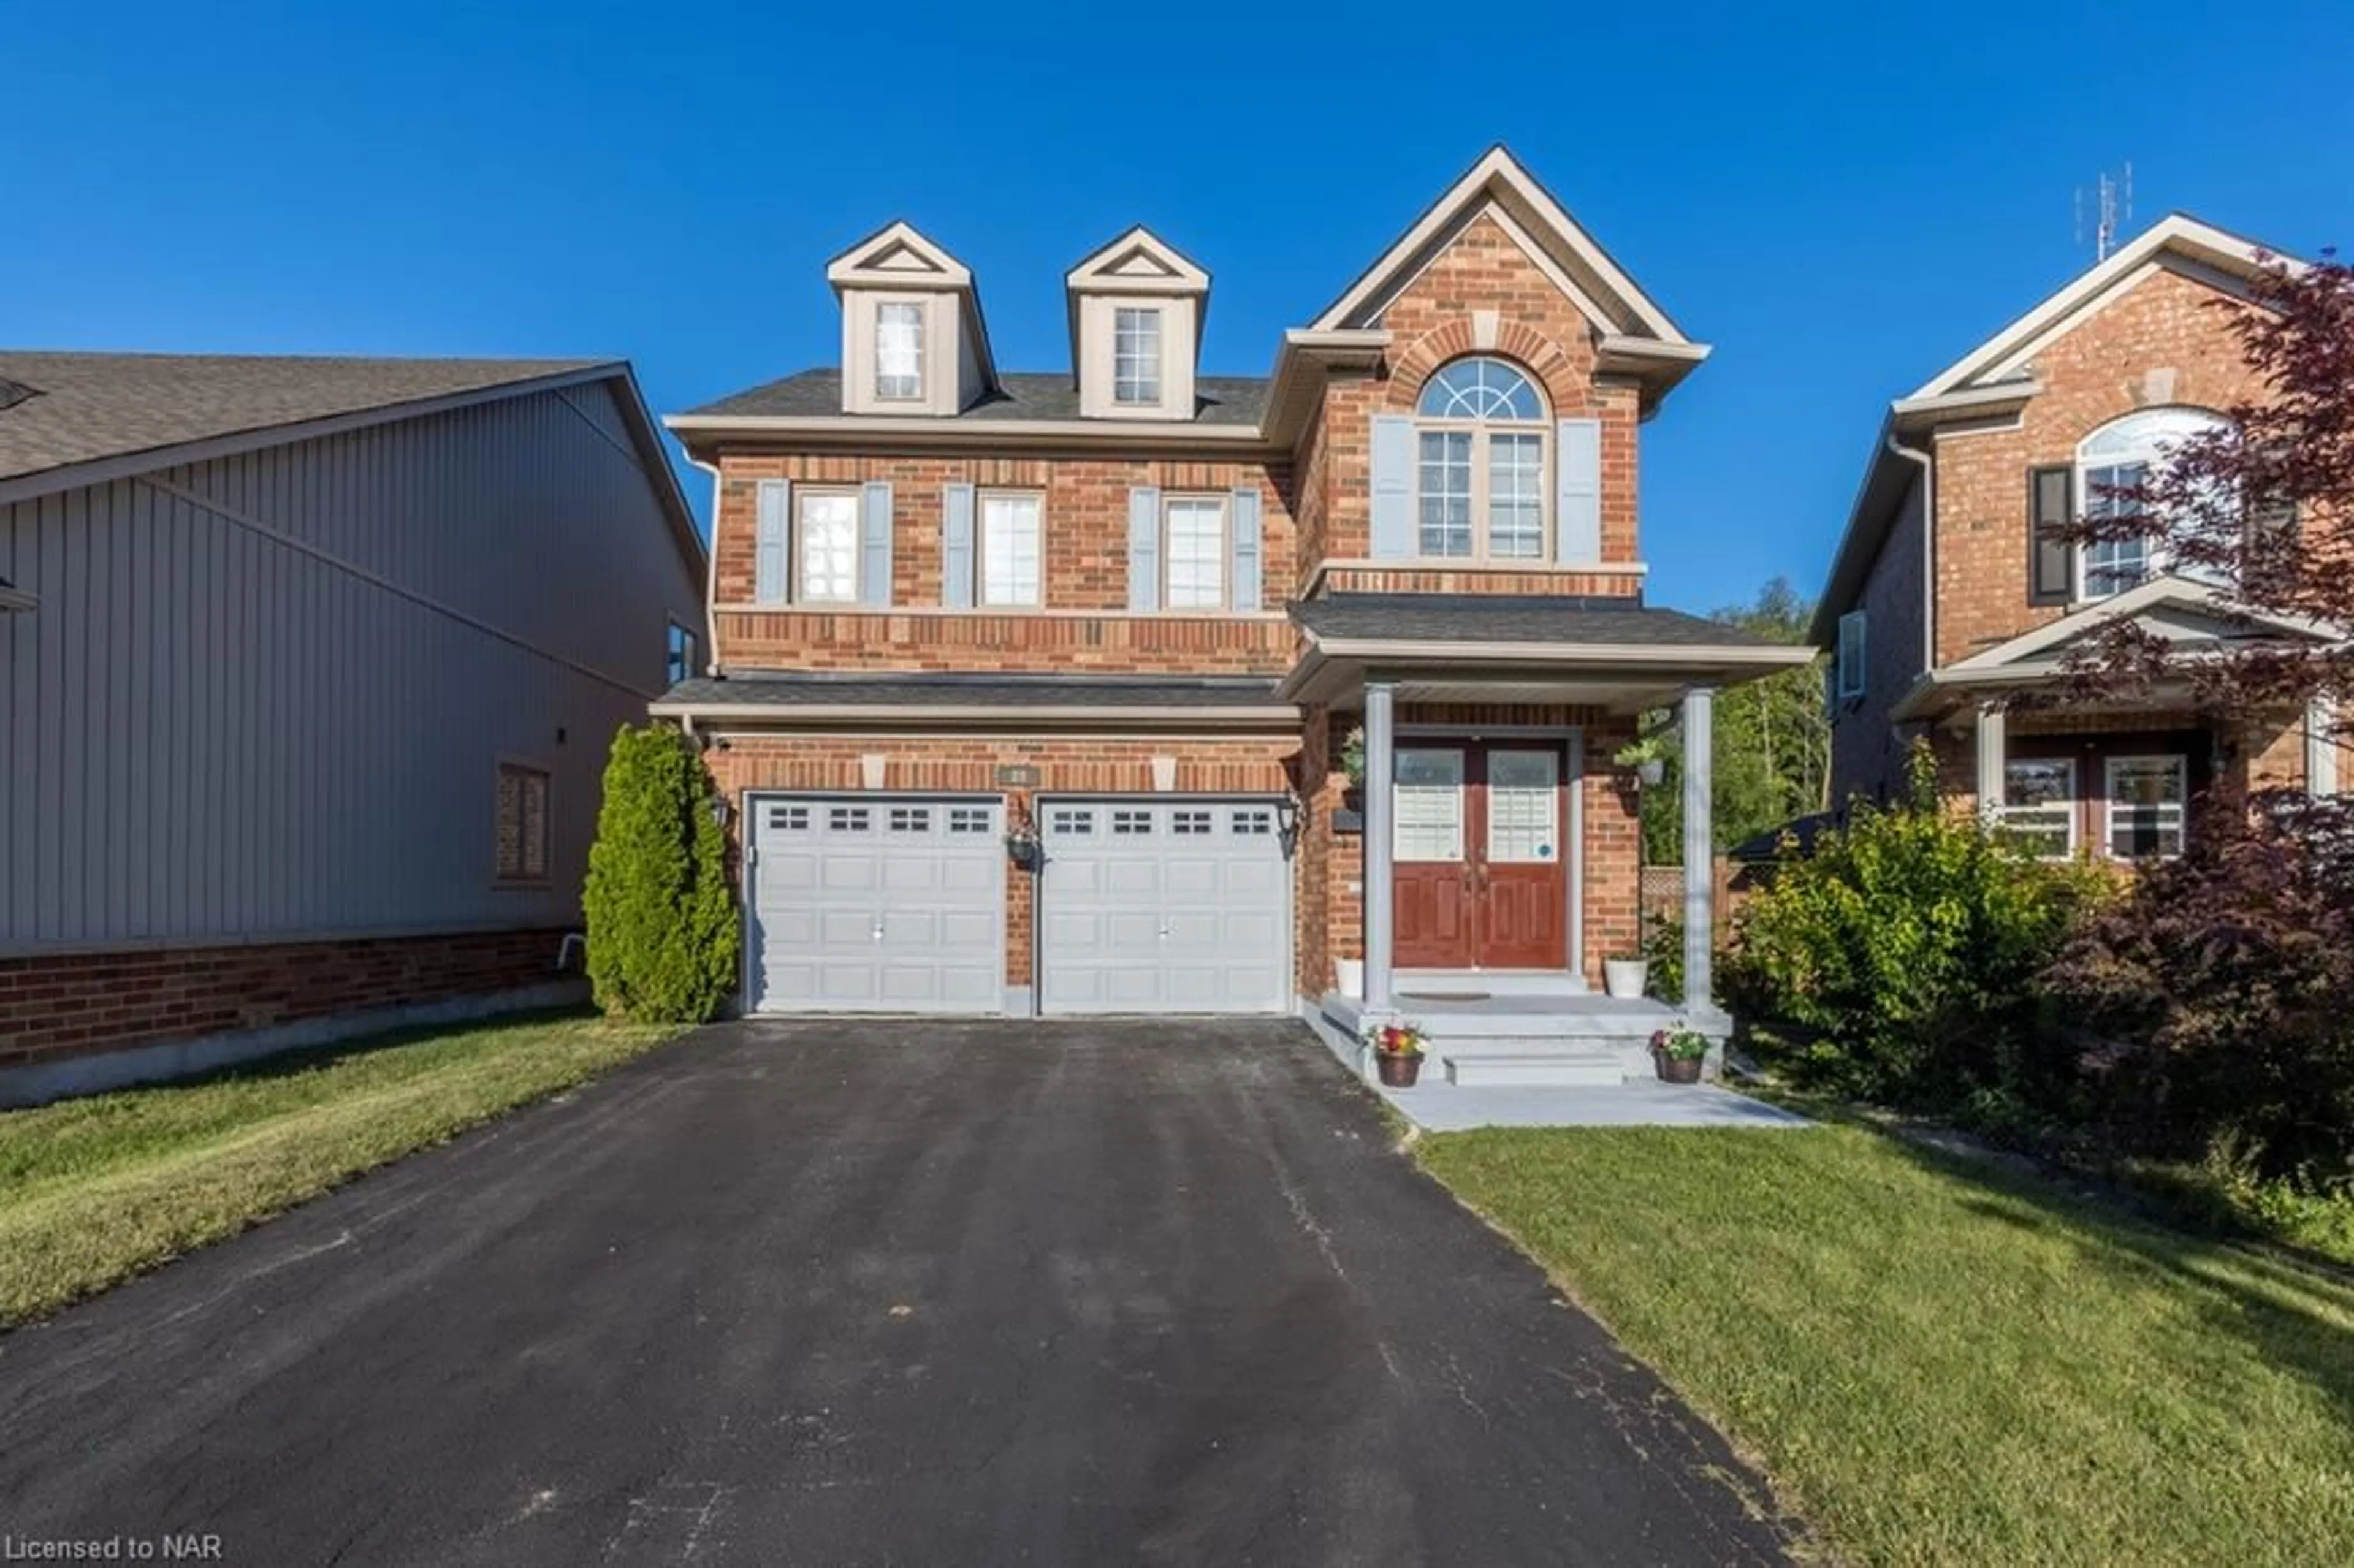 Frontside or backside of a home for 89 Wilfrid Laurier Cres, St. Catharines Ontario L2P 0A2